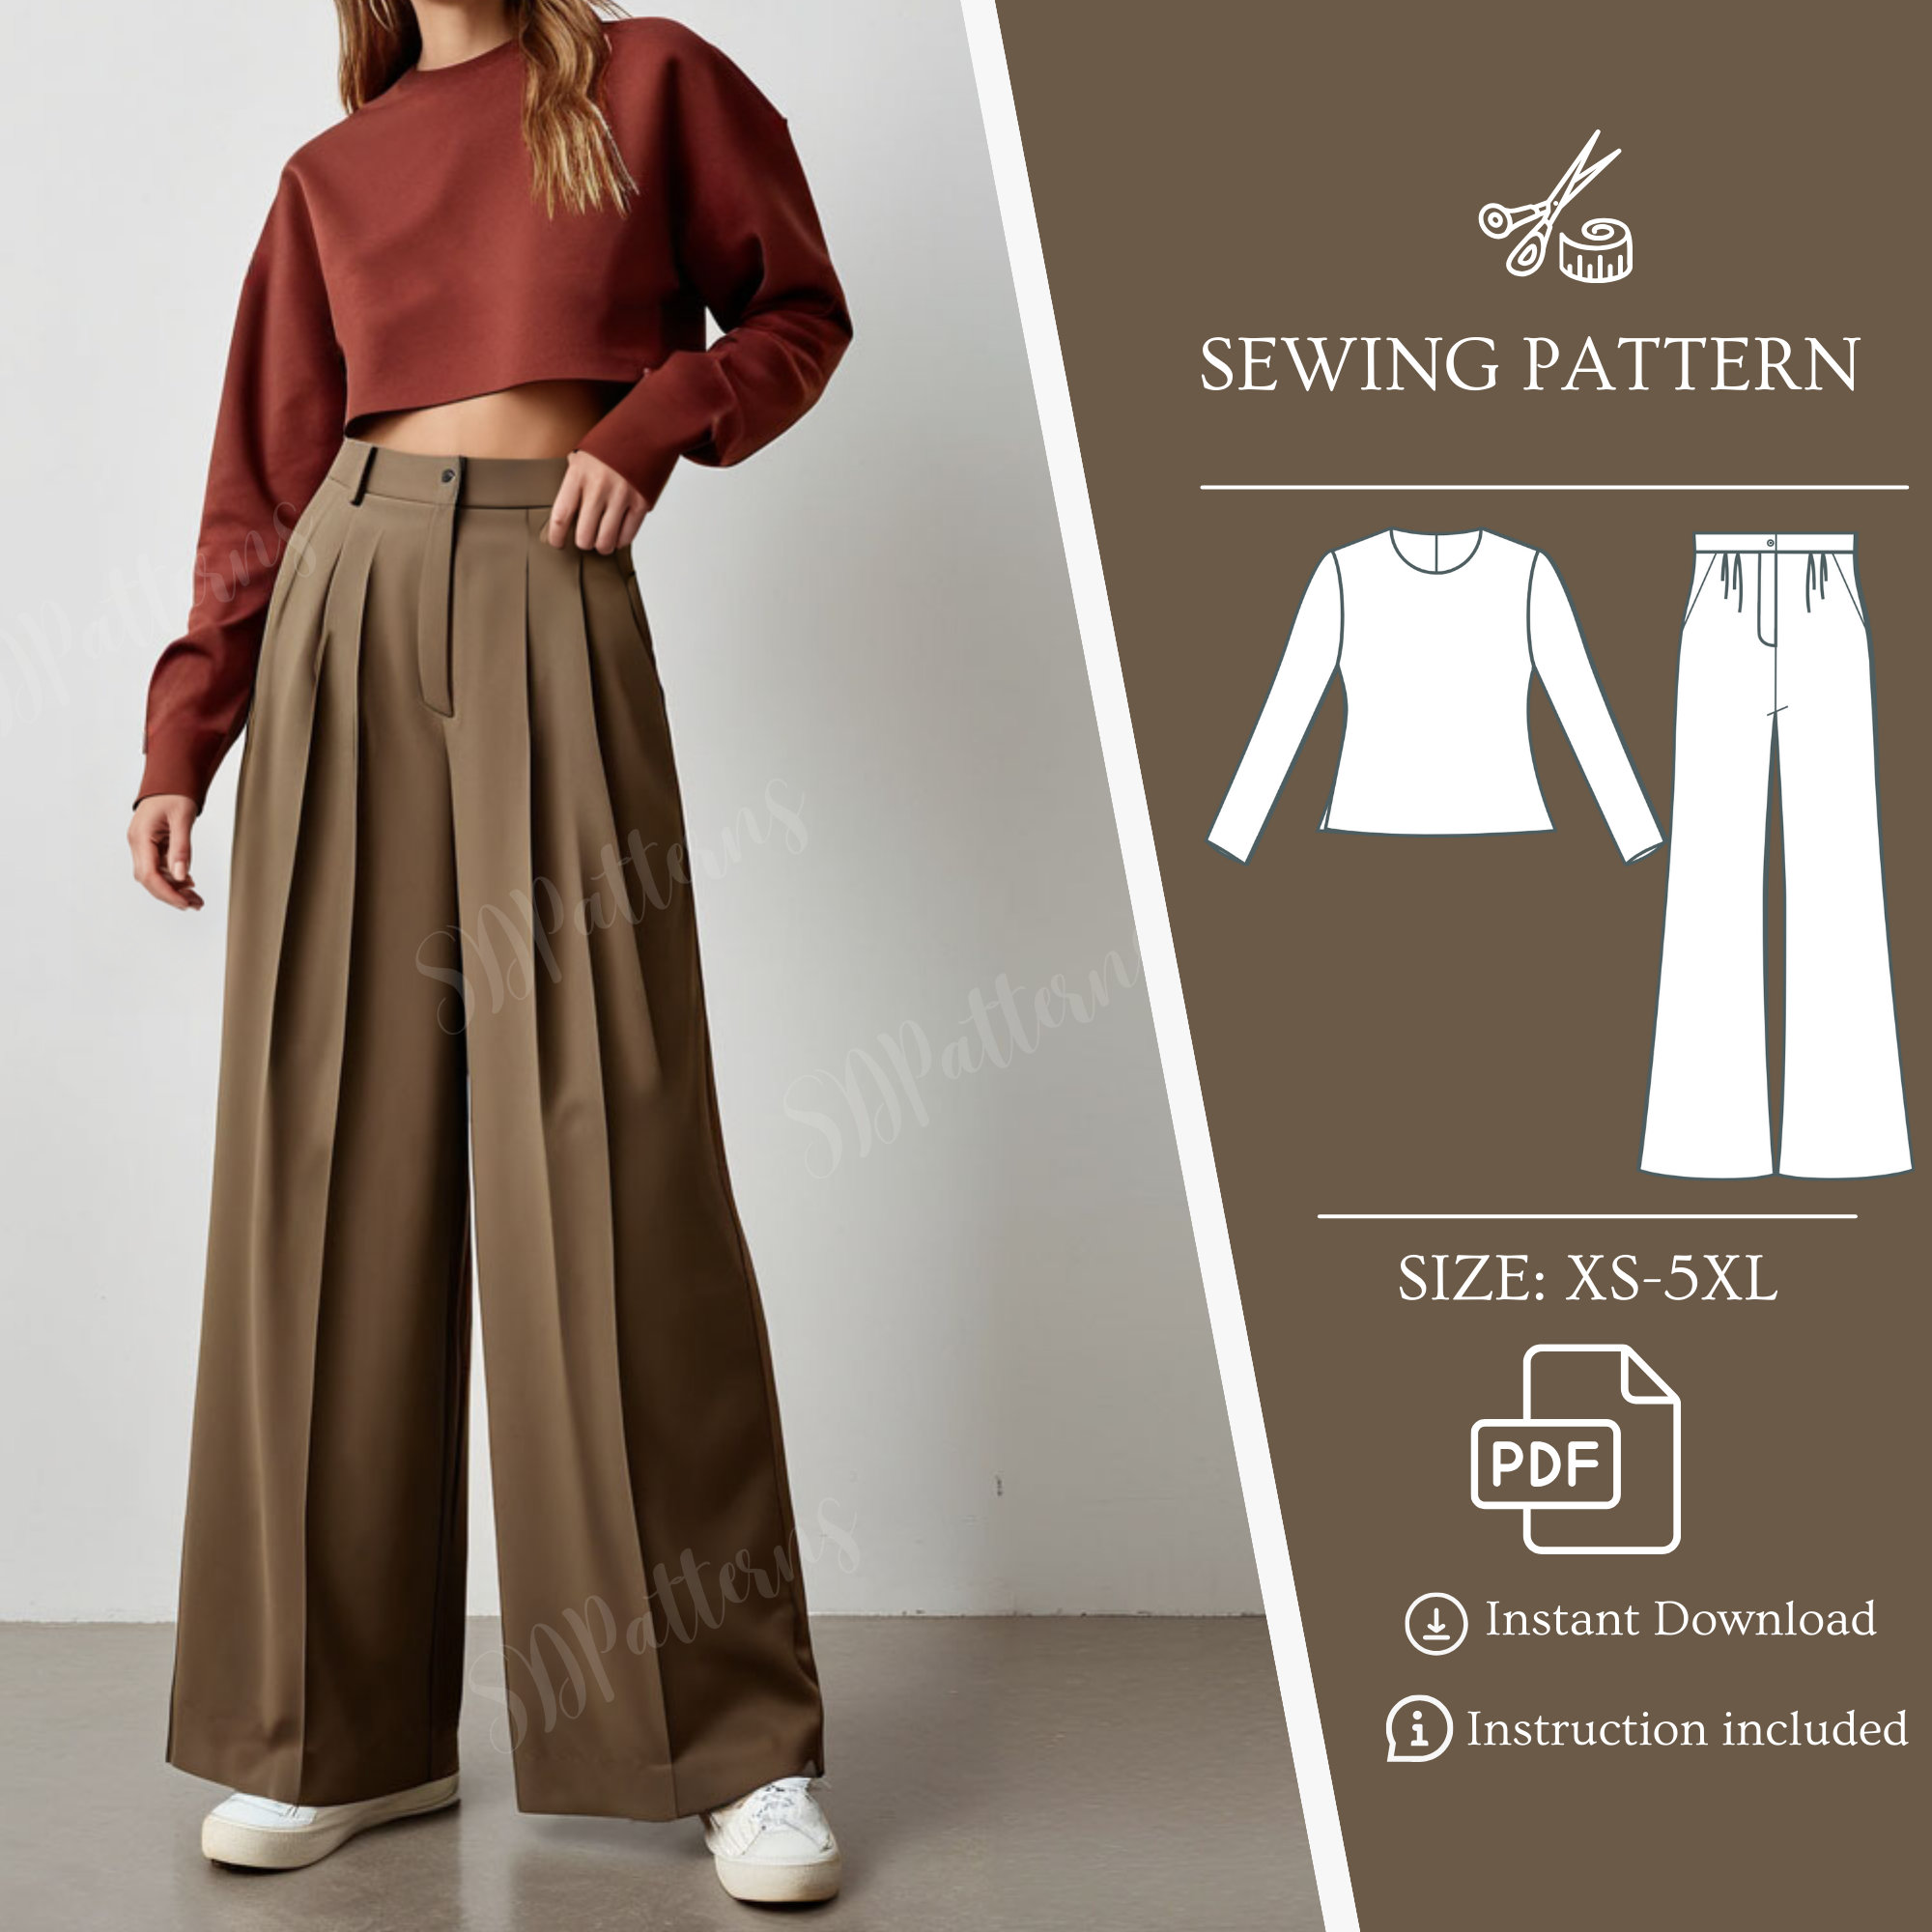 Instant Download Plus Size PDF Pattern Thai Wrap Pants Pattern for Women,  No Buttons or Zipper for a Relaxed Look, for Your DIY Wardrobe 